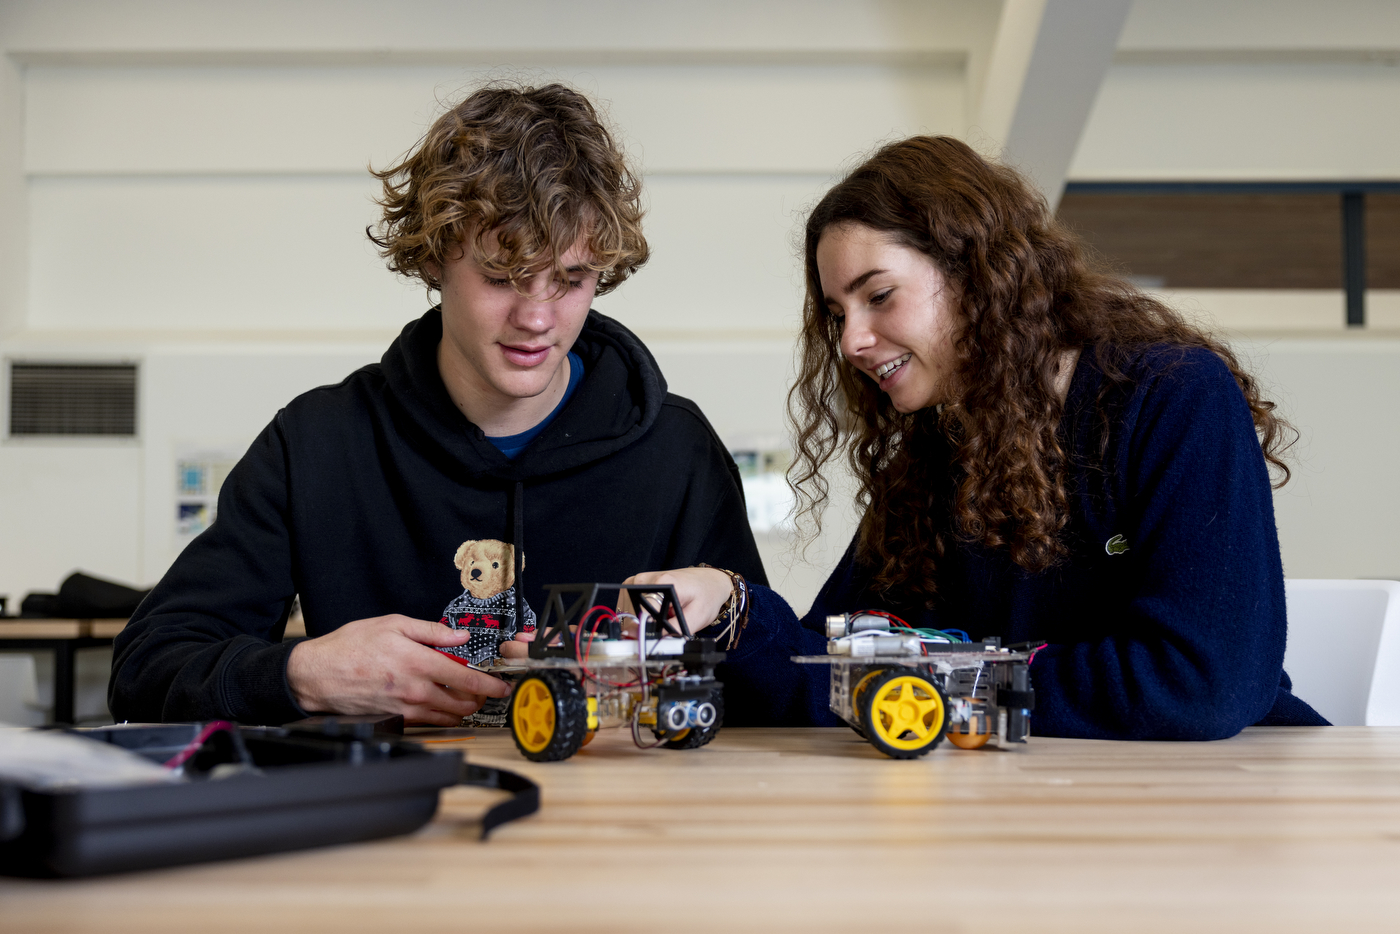 Students working on a self-driving robot at a table.